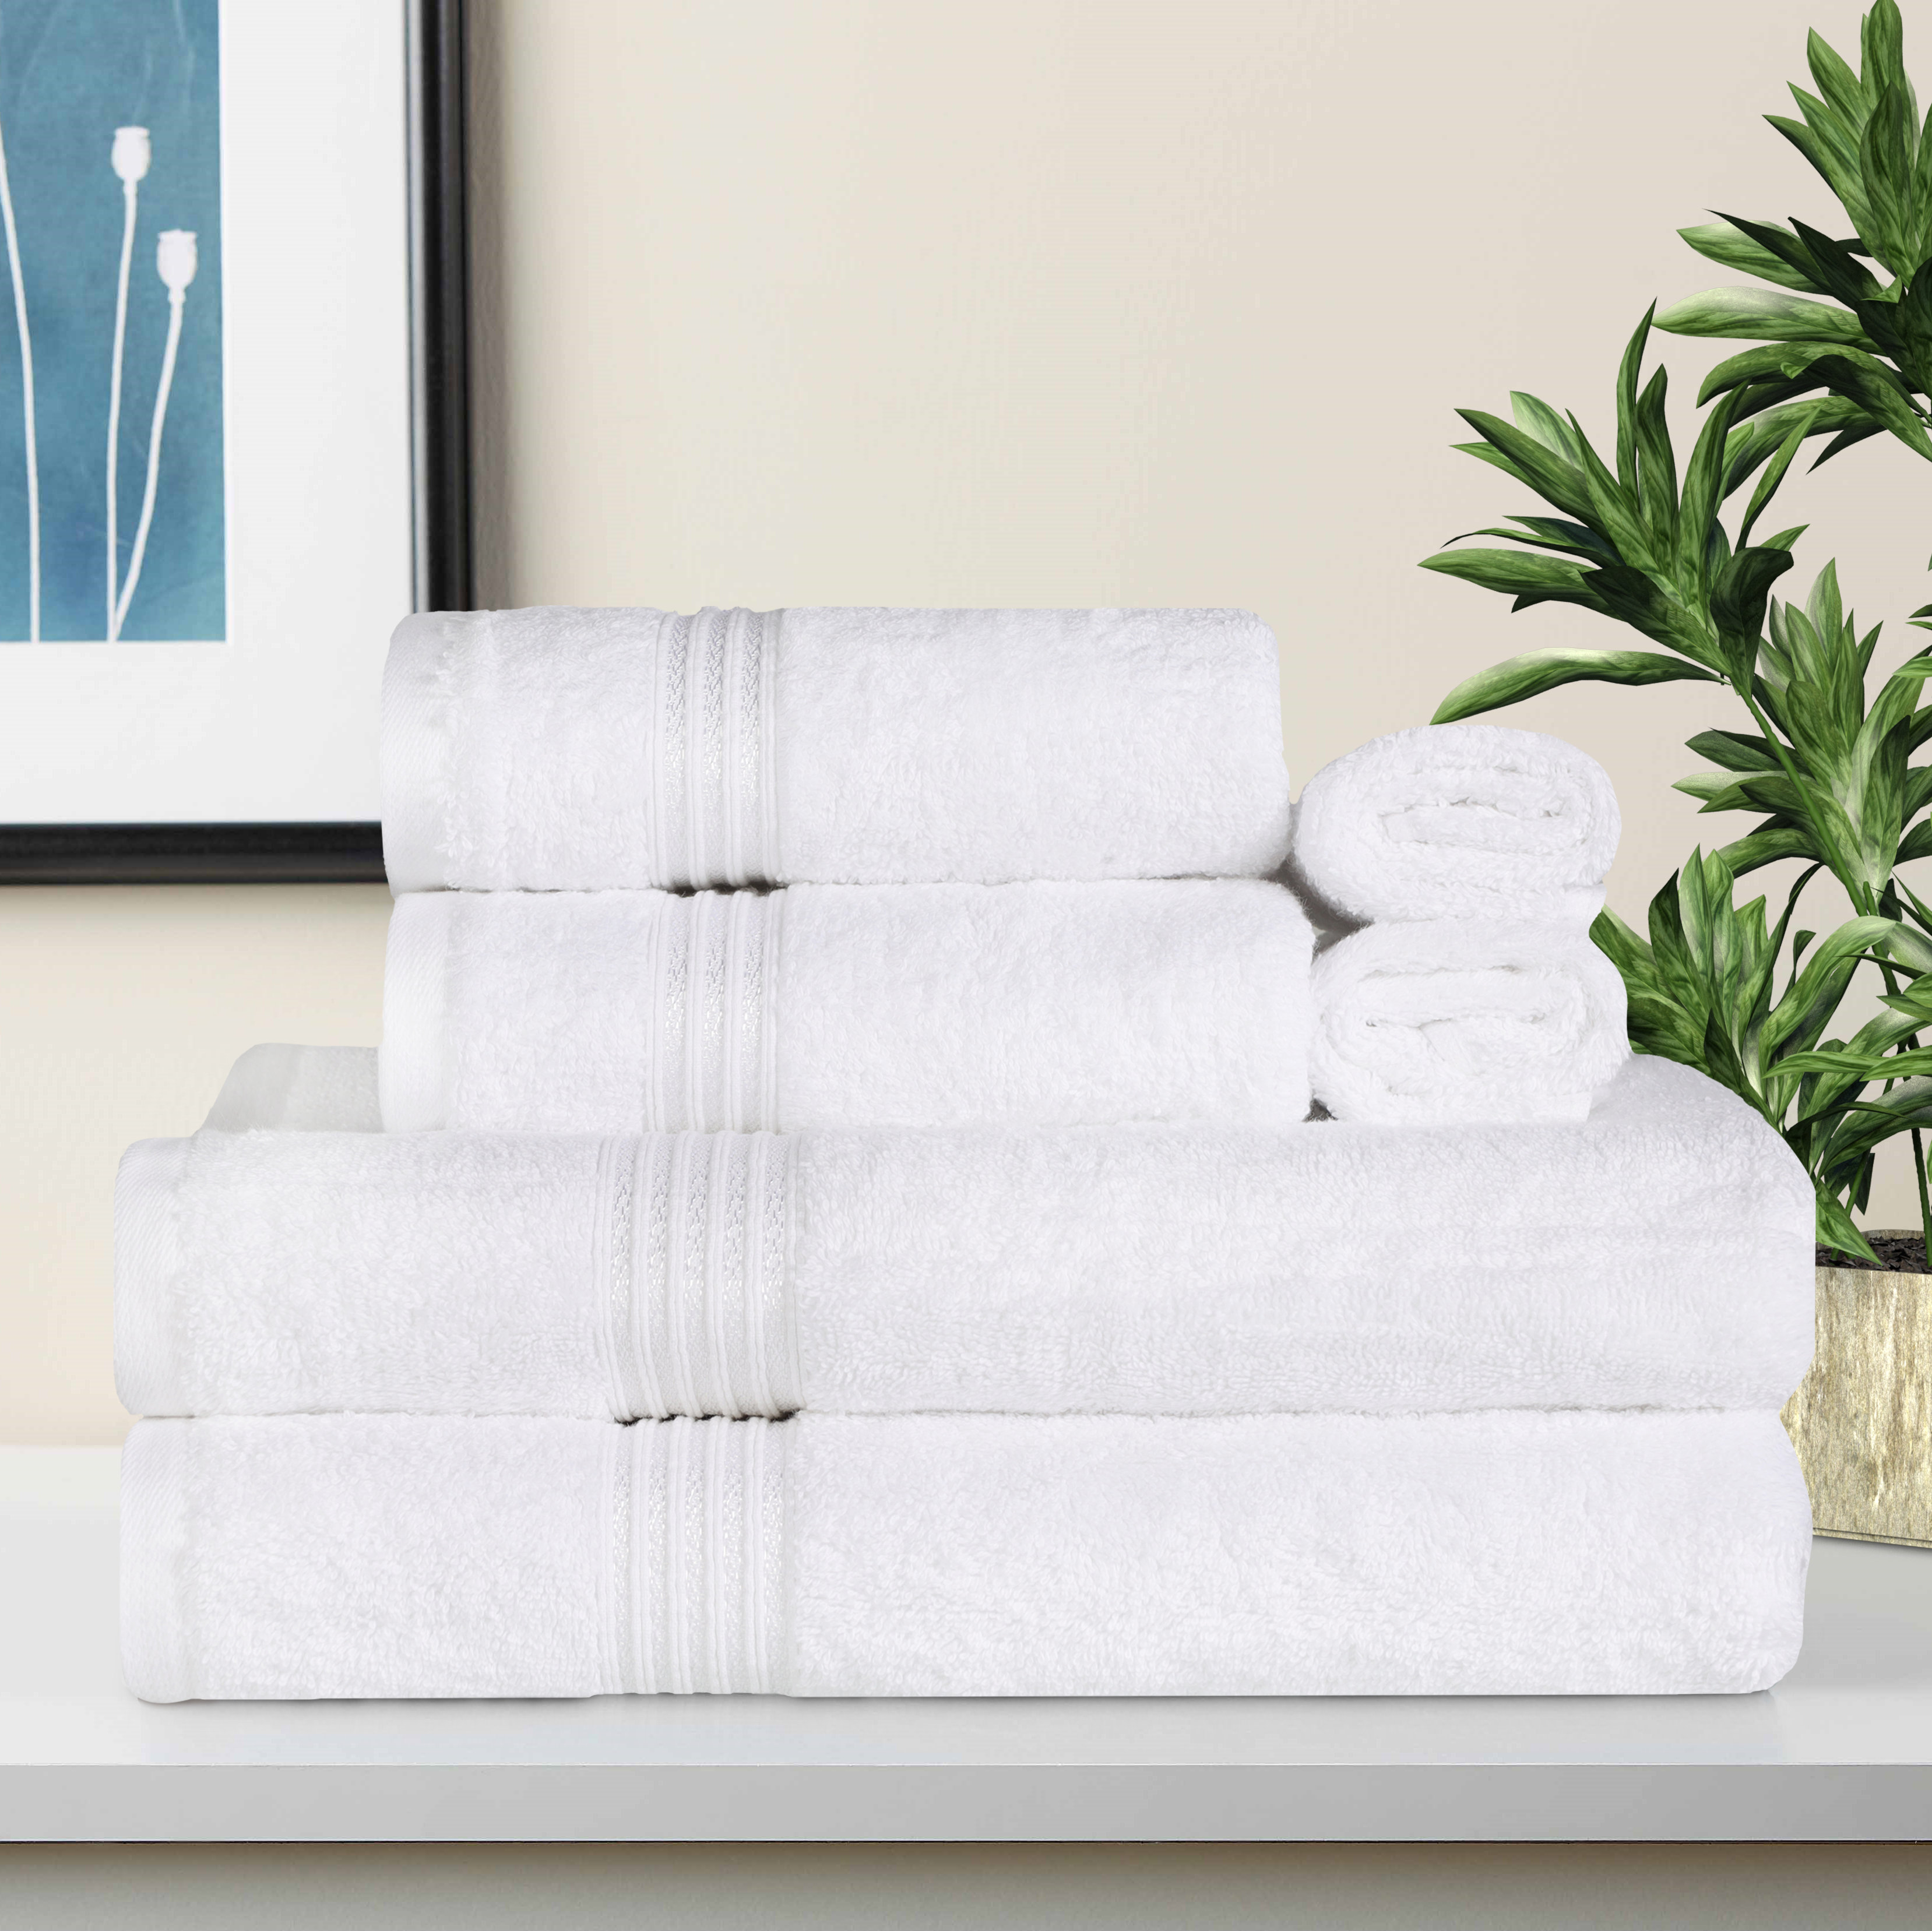 2 Pack Long Terry Cotton Hand Towel Bathroom Towel Solid Color 13.7'' x 29.1'' 